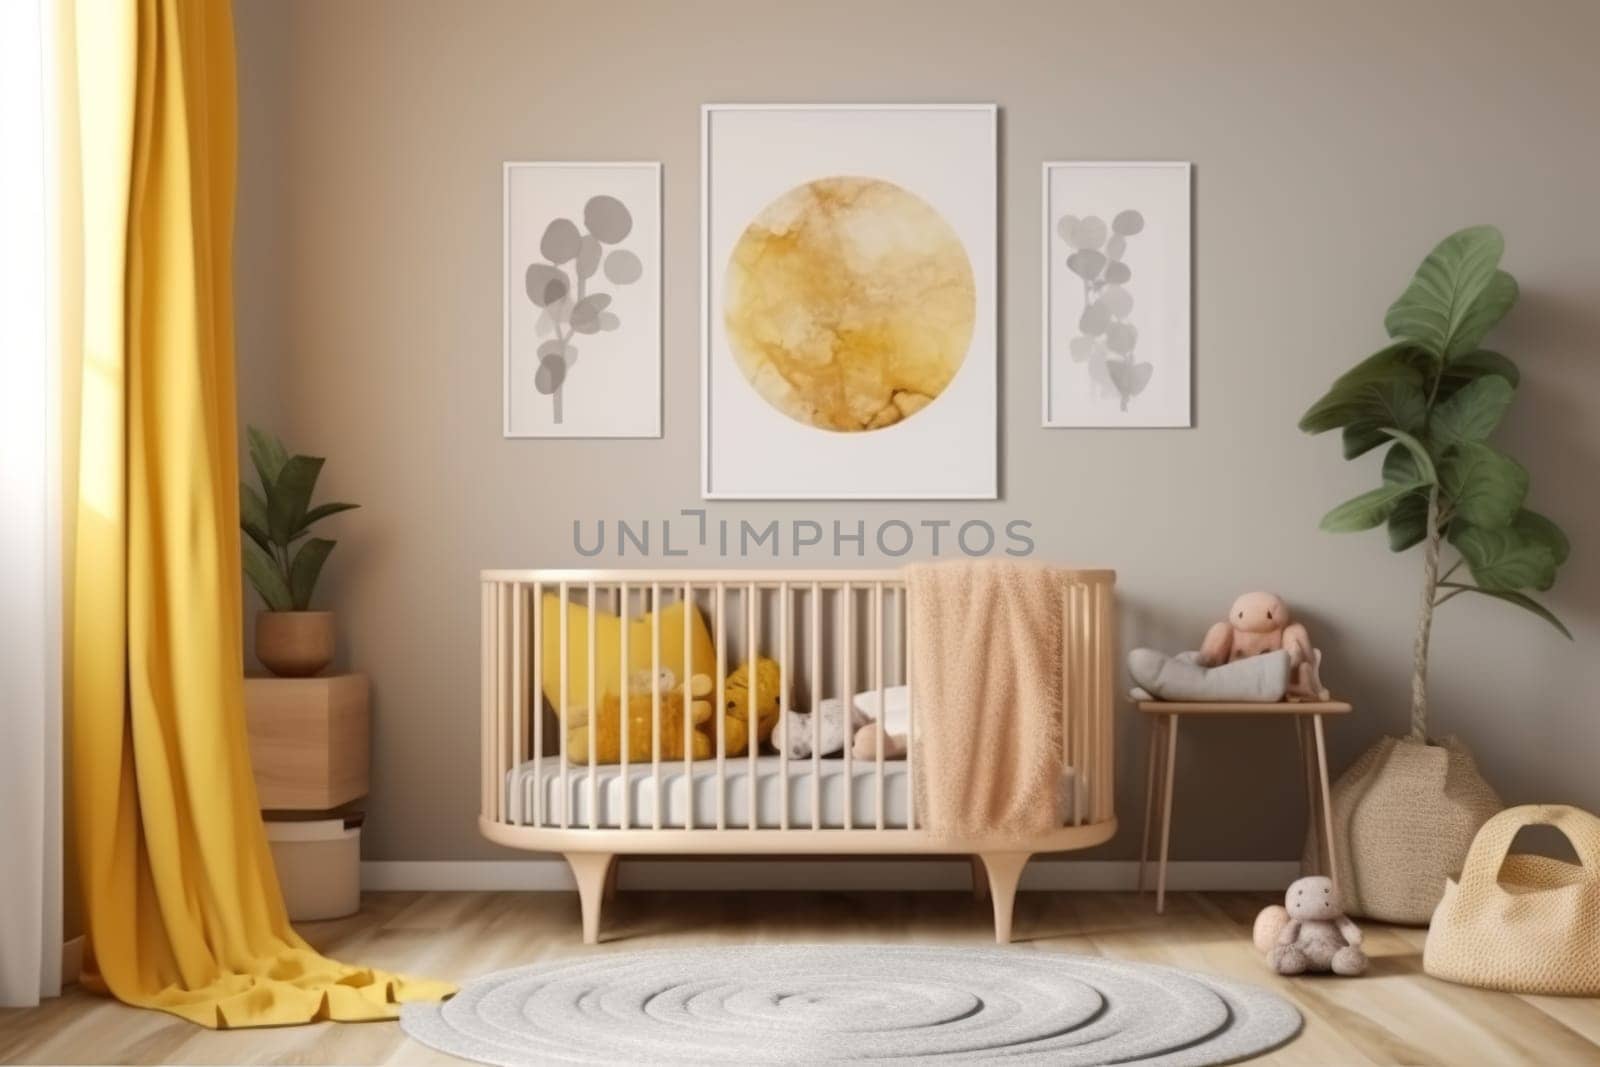 A charming nursery room with pastel tones, featuring a crib, soft toys, and a captivating moon poster, creating a soothing ambiance for a baby's restful sleep